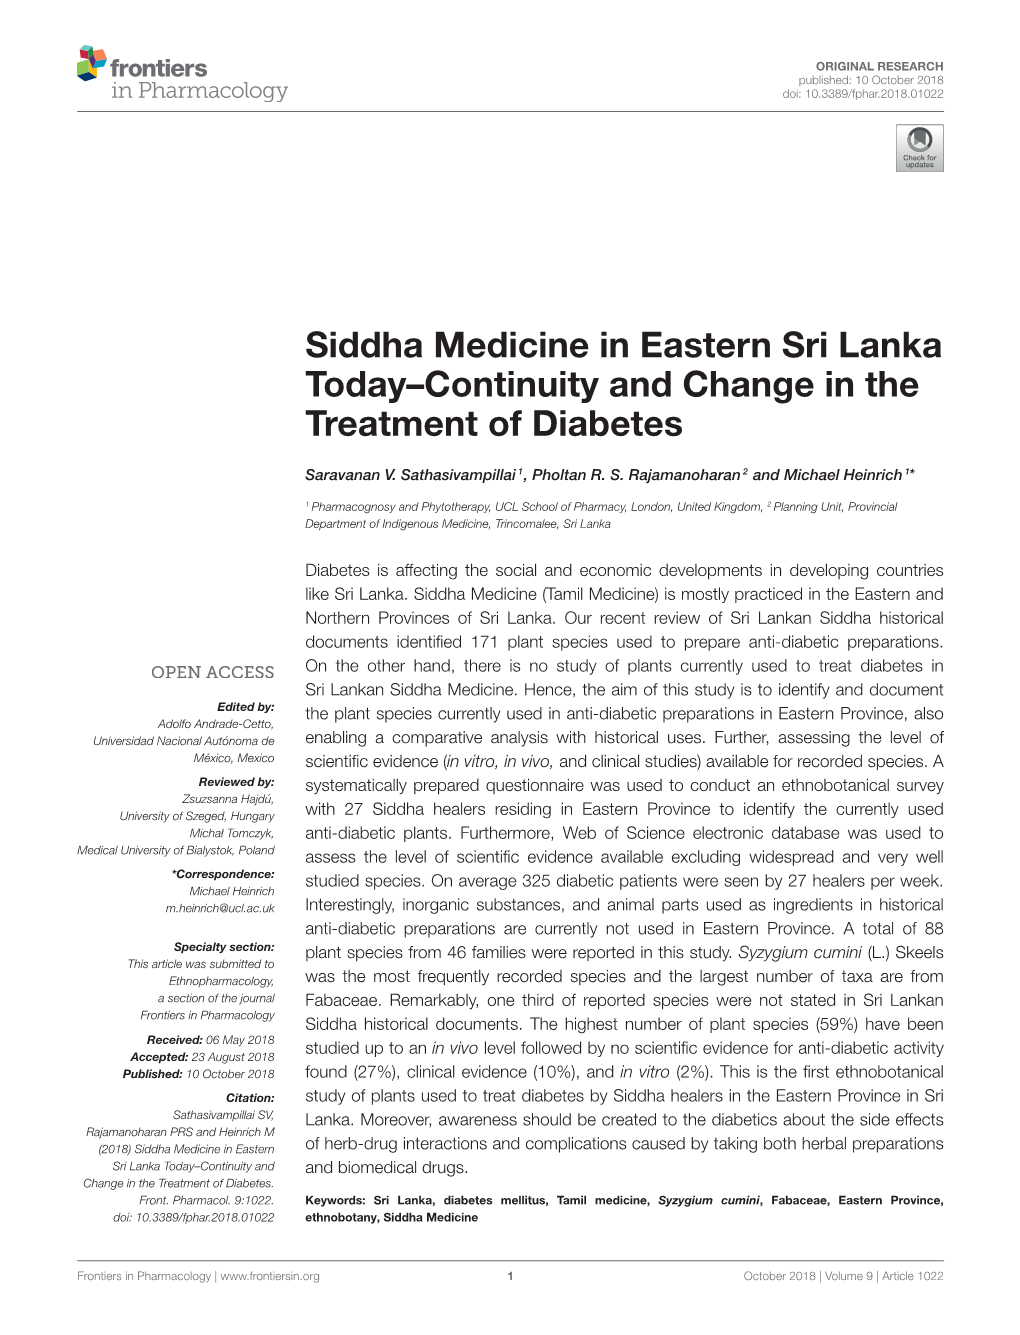 Siddha Medicine in Eastern Sri Lanka Today–Continuity and Change in the Treatment of Diabetes